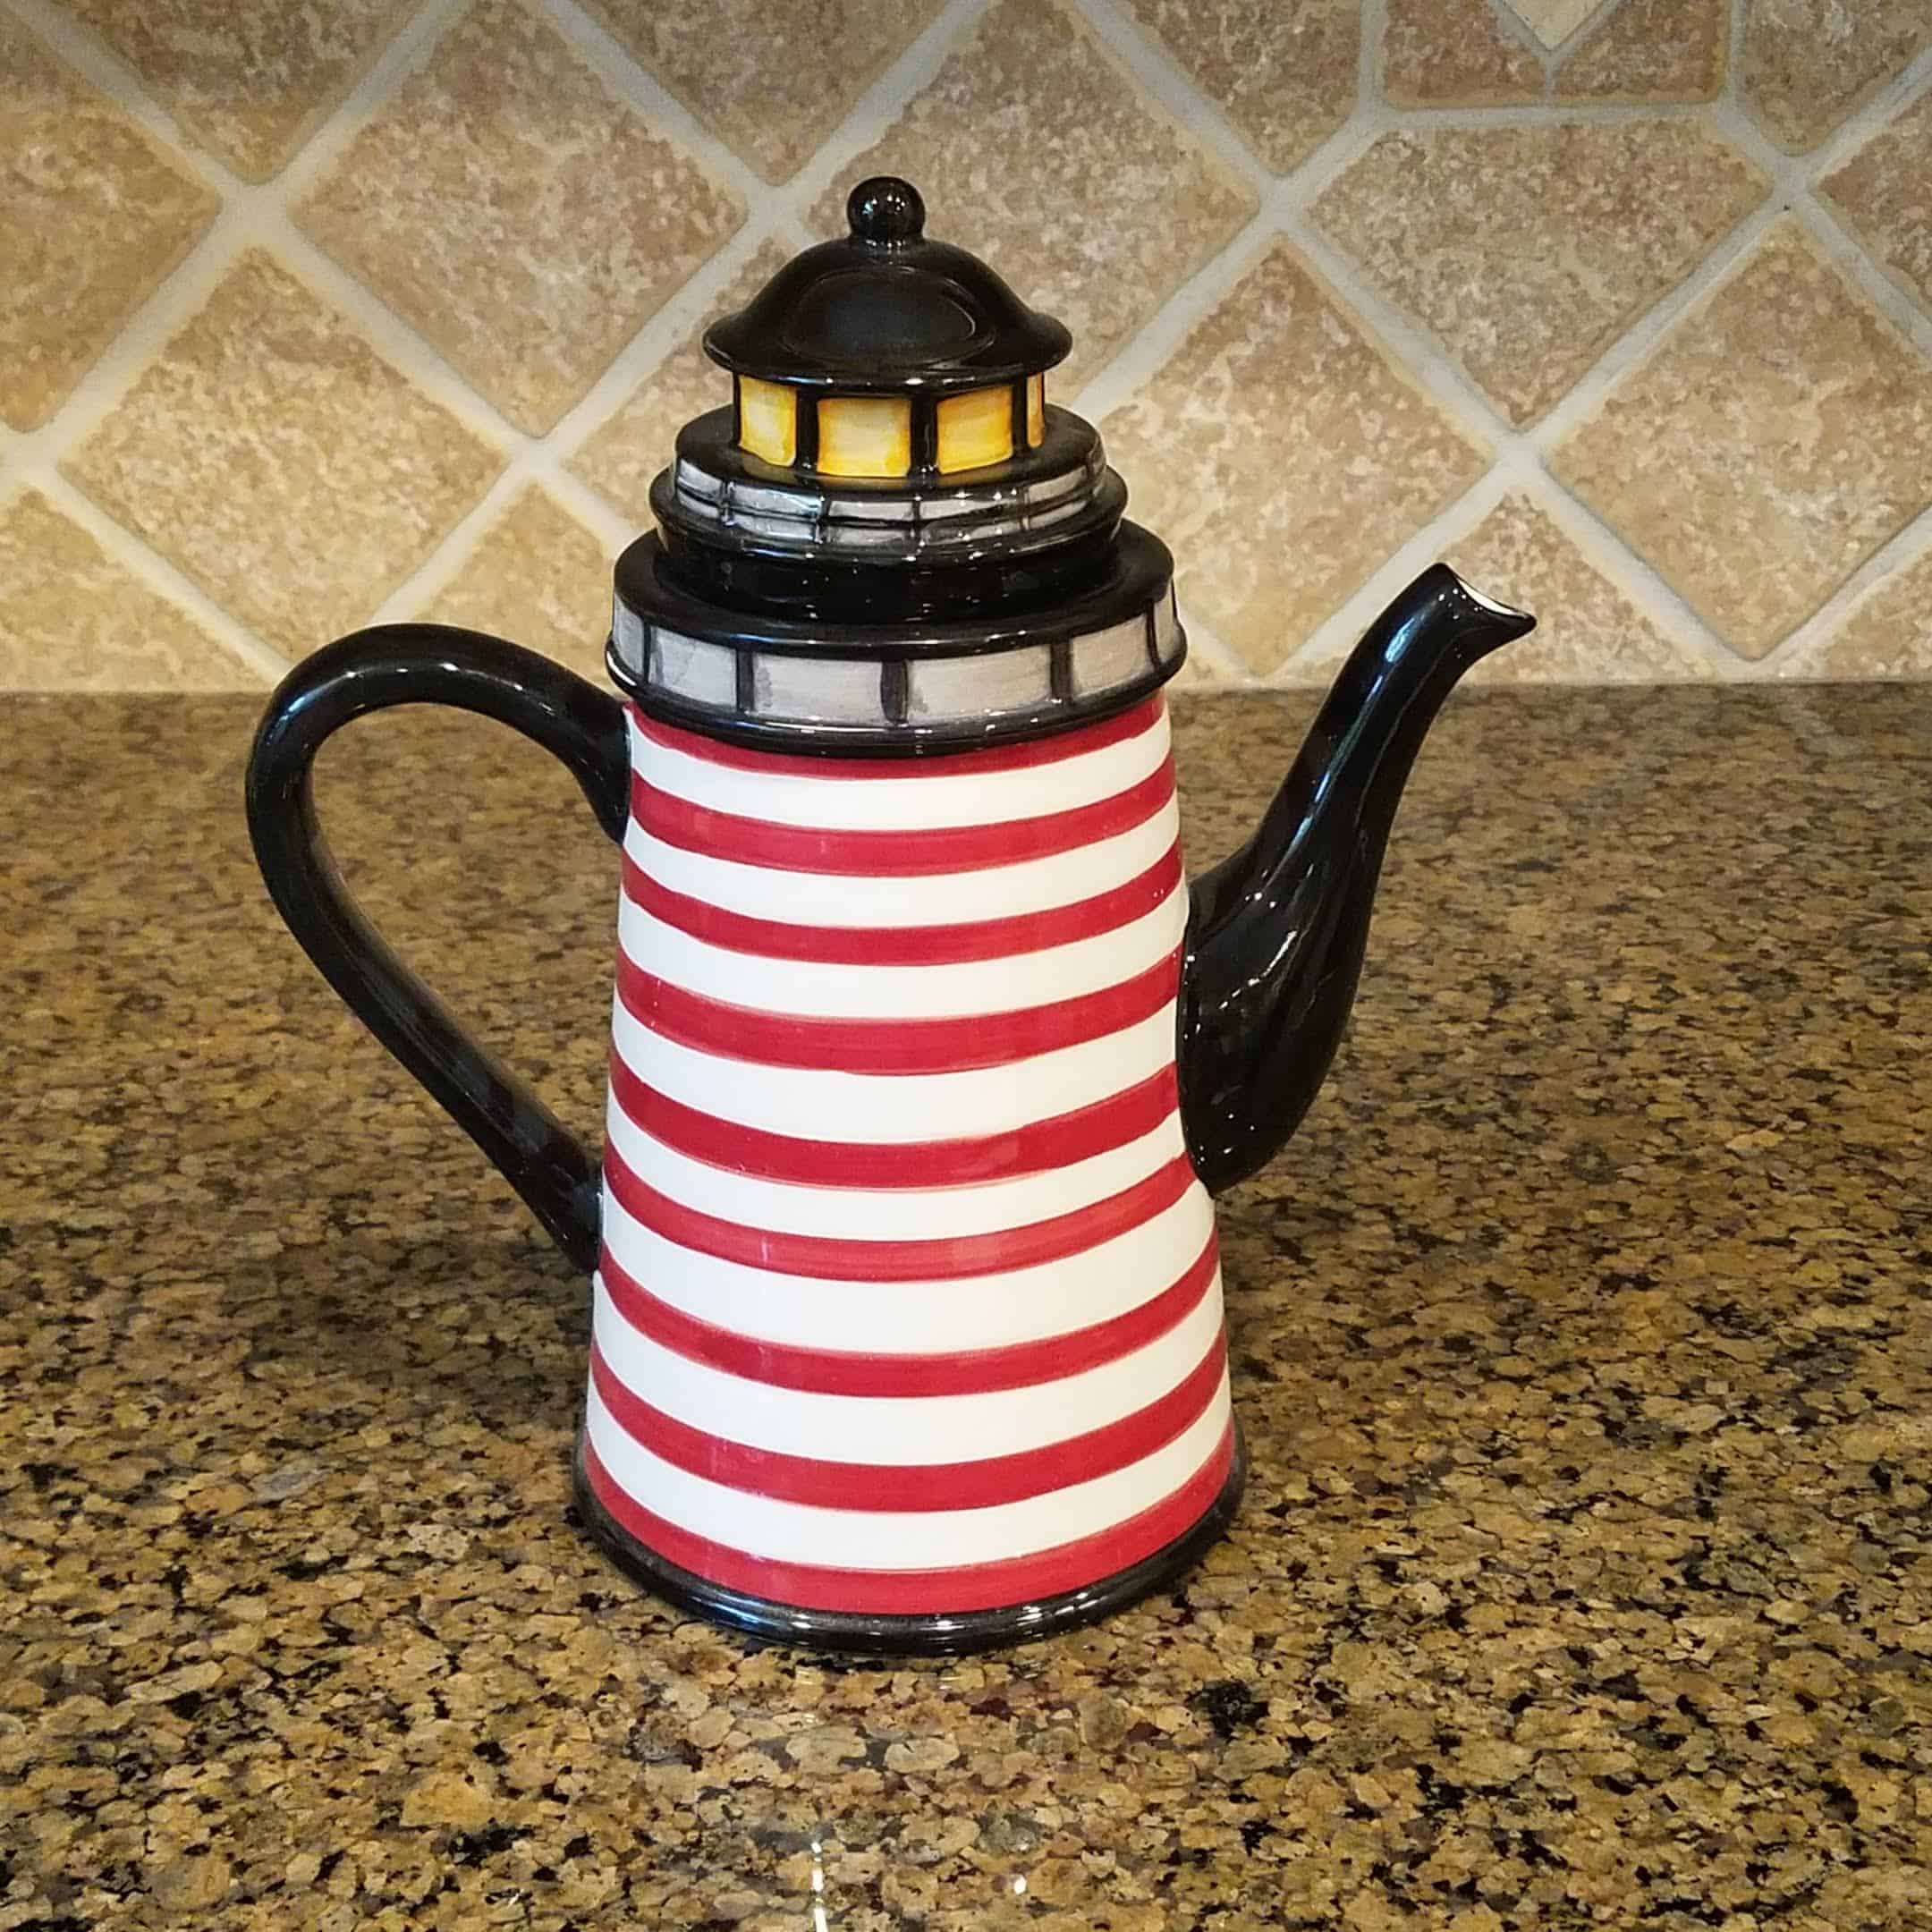 This Beacon Lighthouse Teapot is made with love by Premier Homegoods! Shop more unique gift ideas today with Spots Initiatives, the best way to support creators.